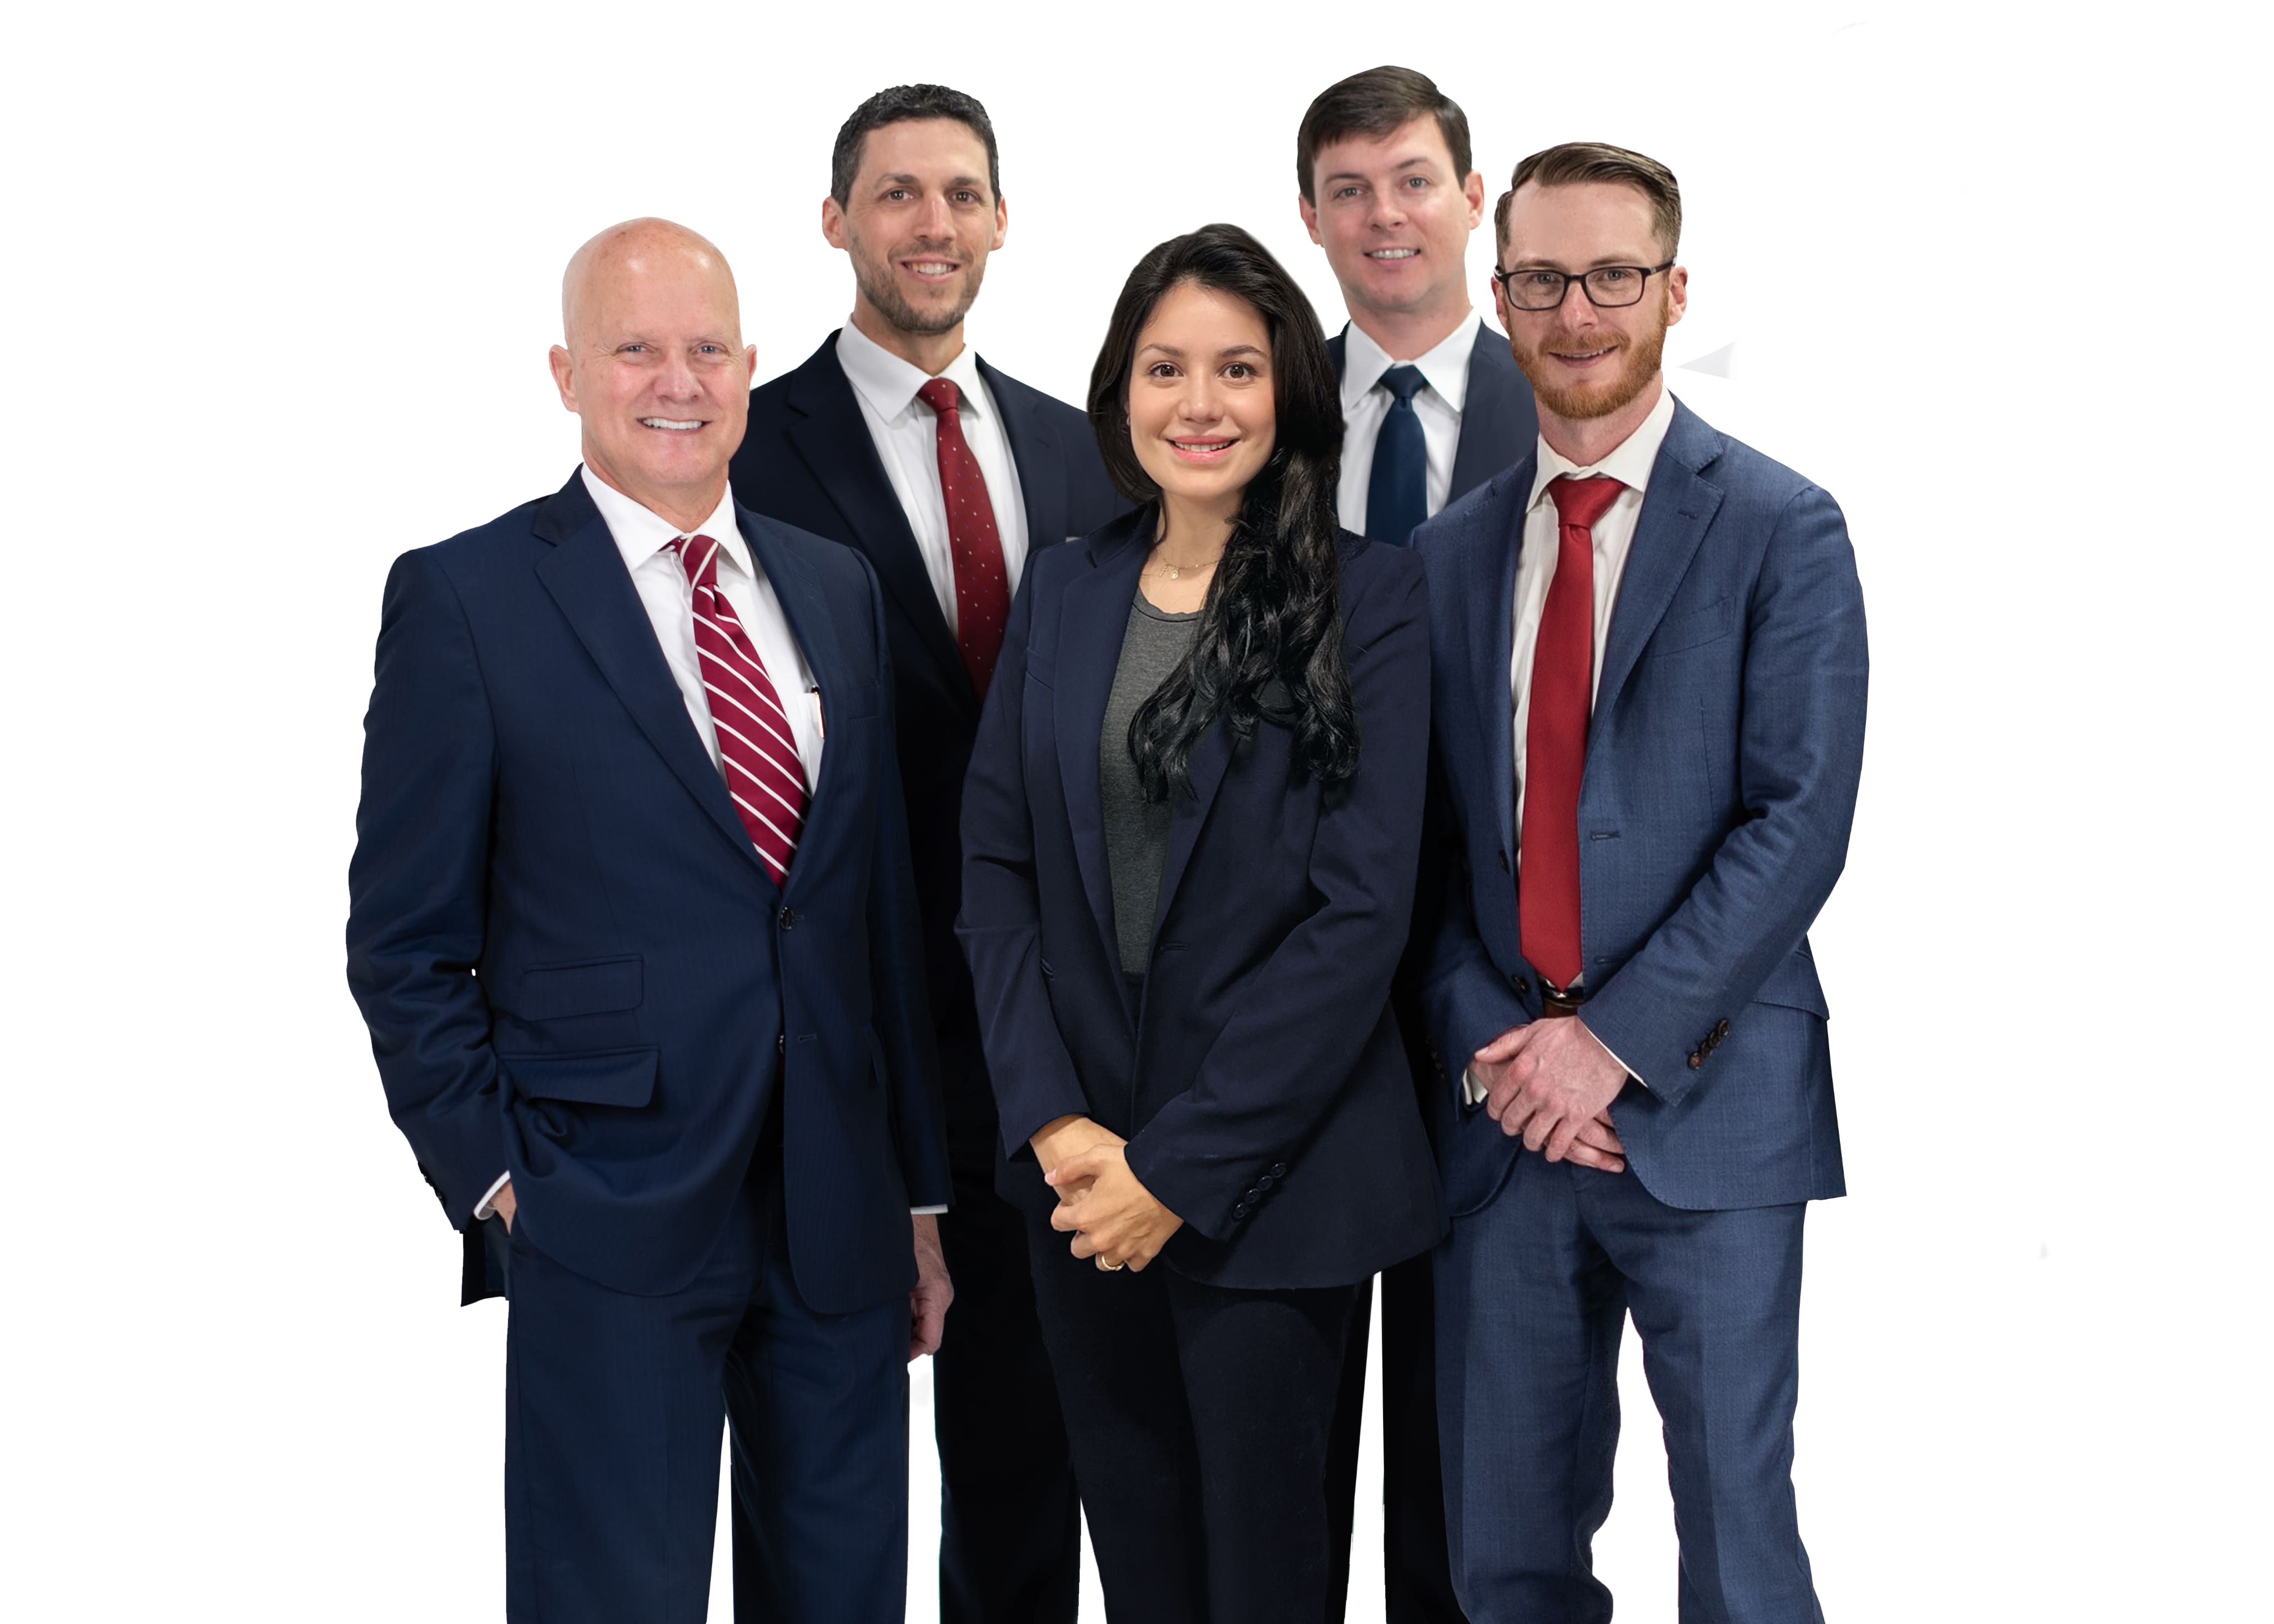 Criminal Defense Attorneys At The Medlin Law Firm In Fort Worth Texas			 - Photos of Our Business -  The Medlin Law Firm